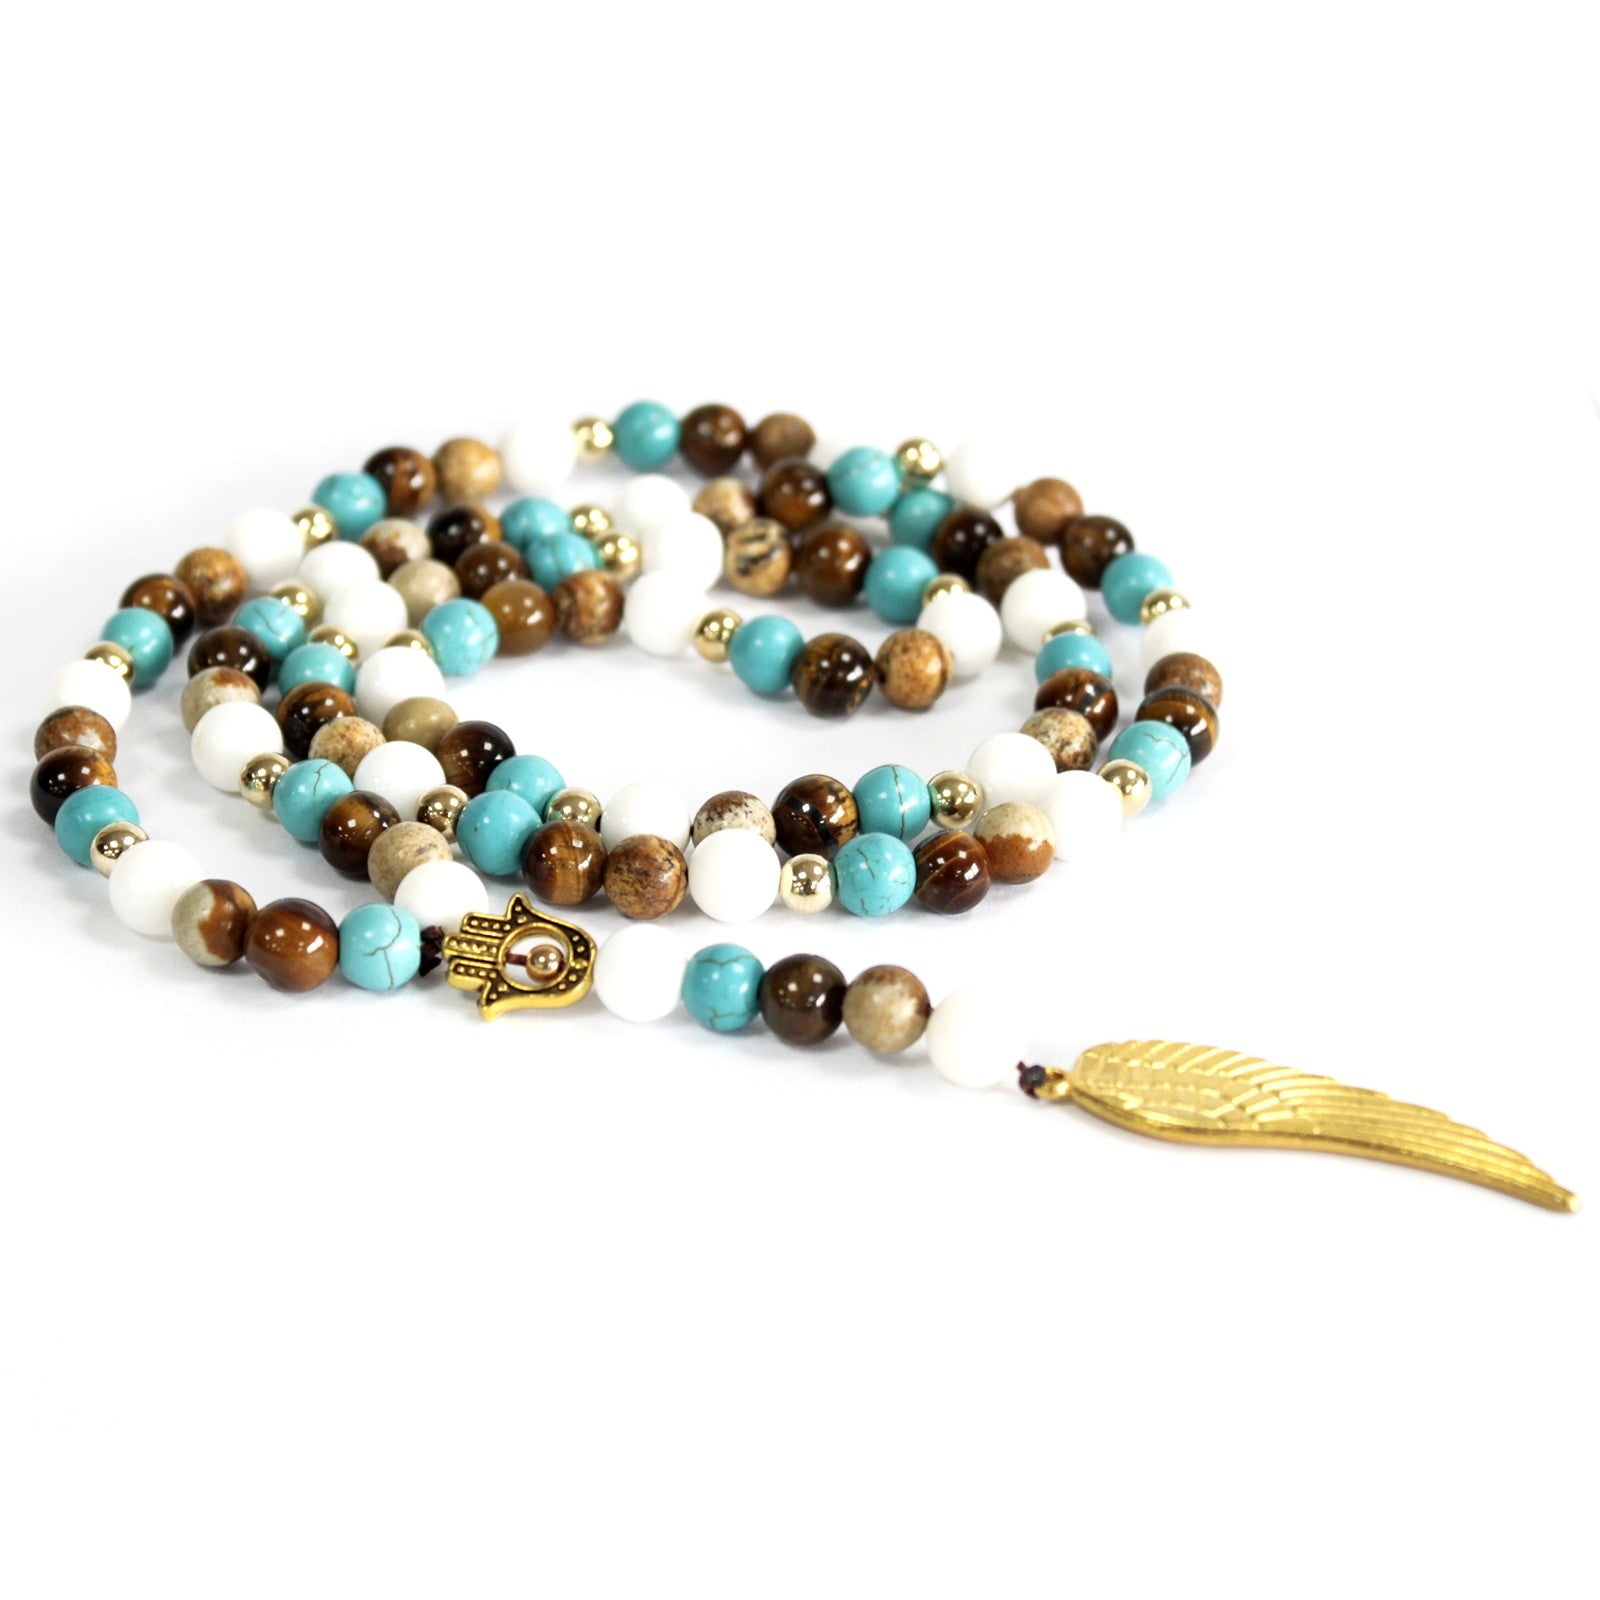 View Angel Wing Multi Beads Gemstone Necklace information